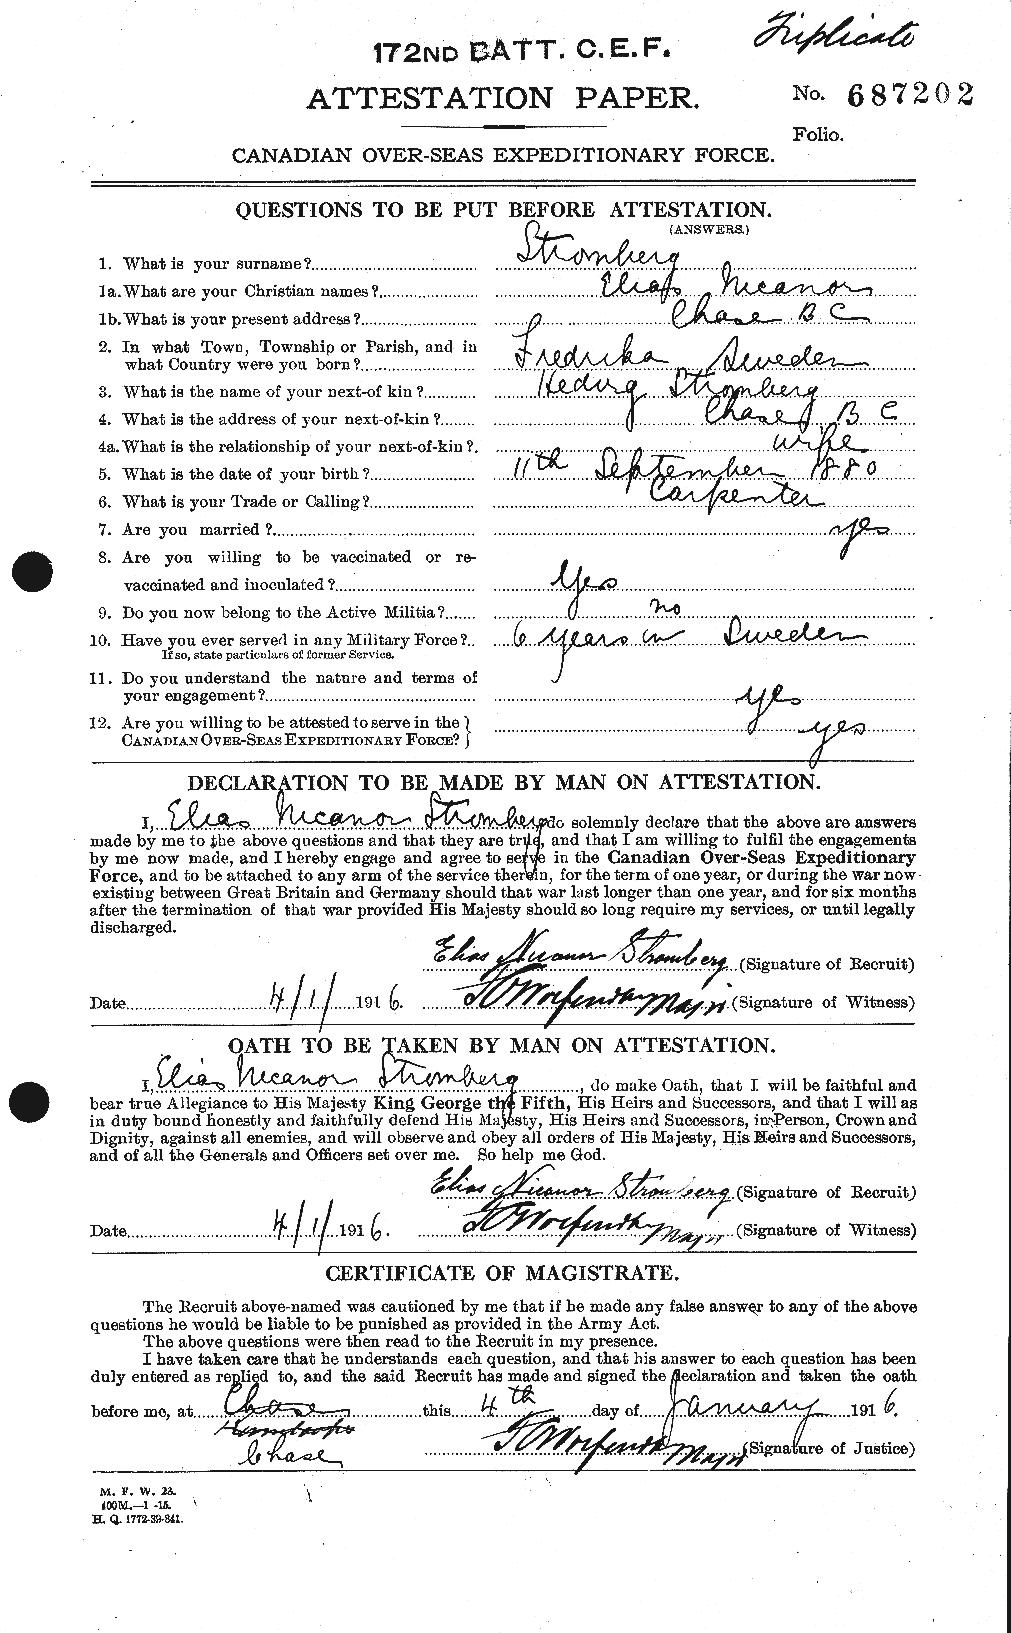 Personnel Records of the First World War - CEF 124028a